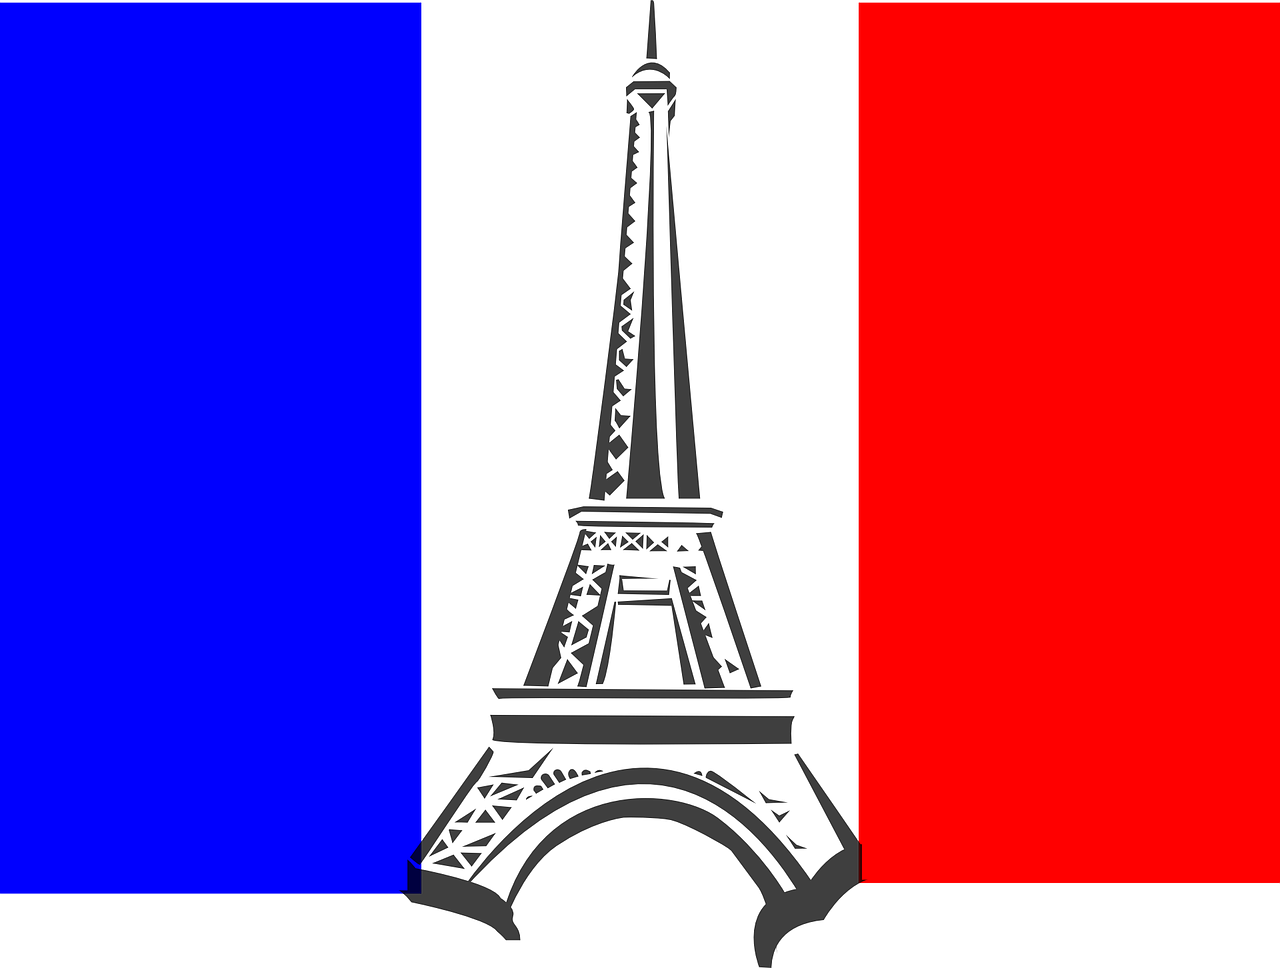 The french flag with a drawing of the Eiffel Tower